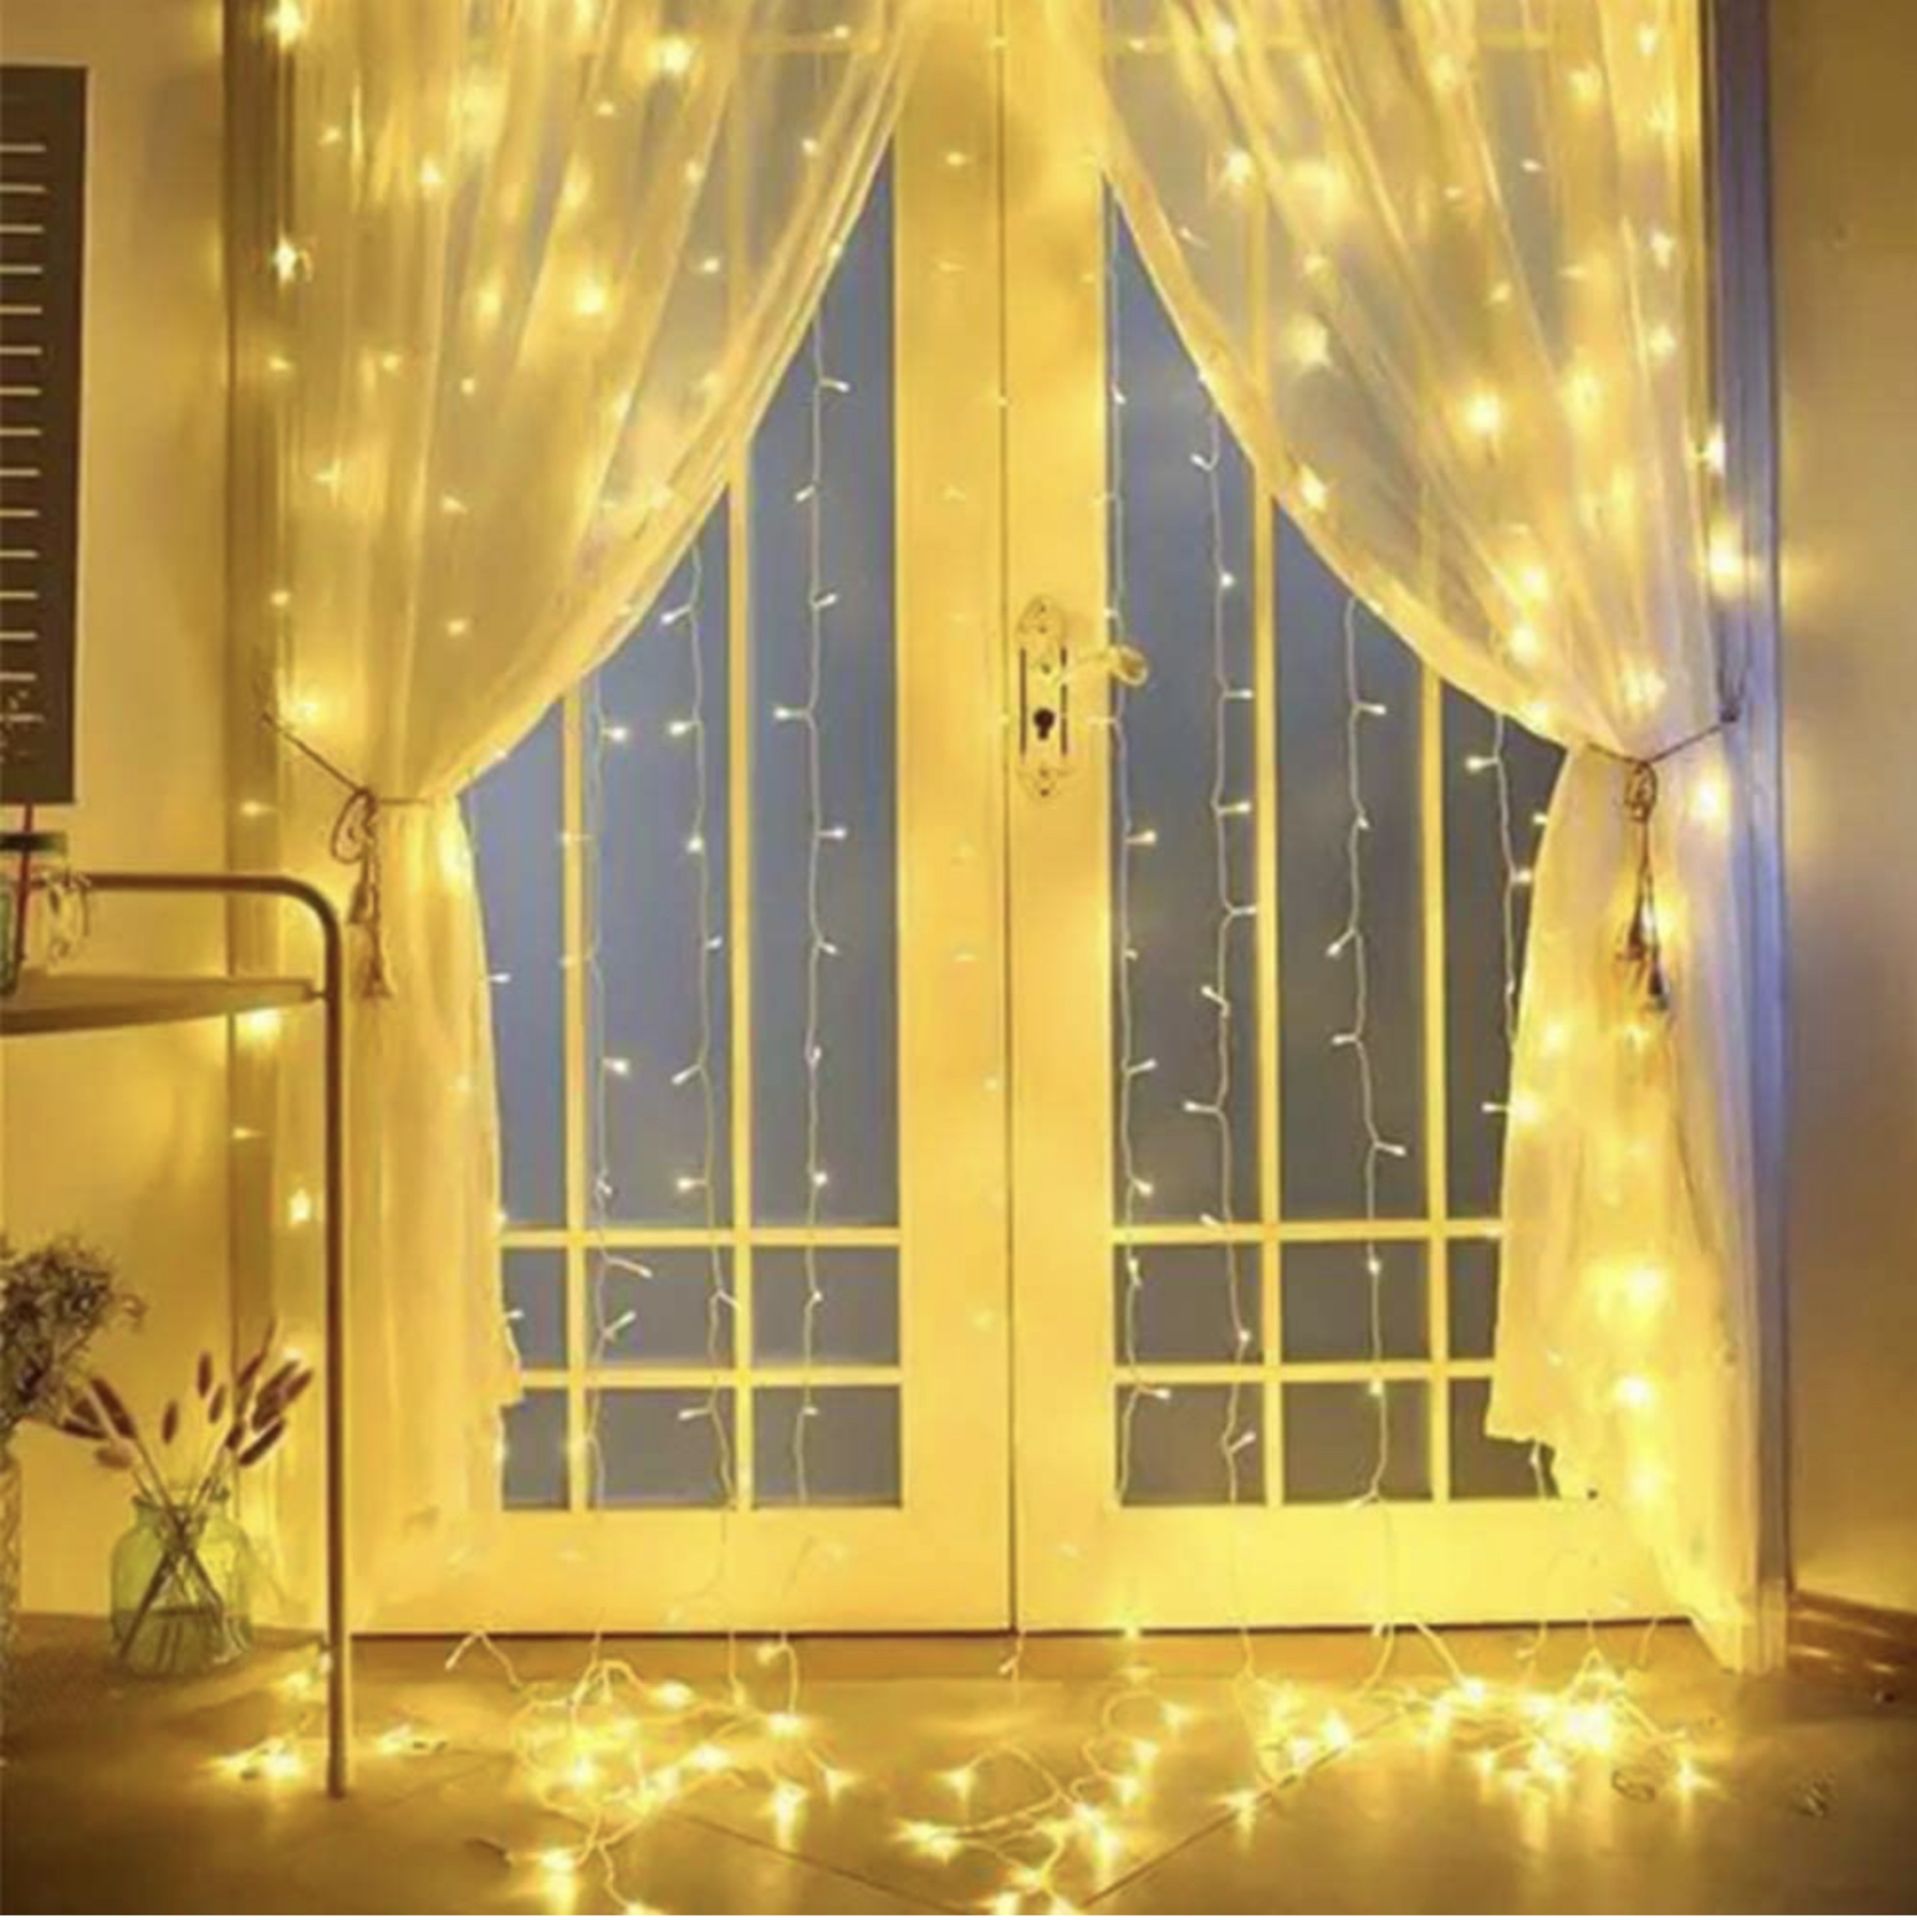 LED Curtain Lights Plug In 3mx3m Mains Powered Fairy Lights with Timer Function Remote Control